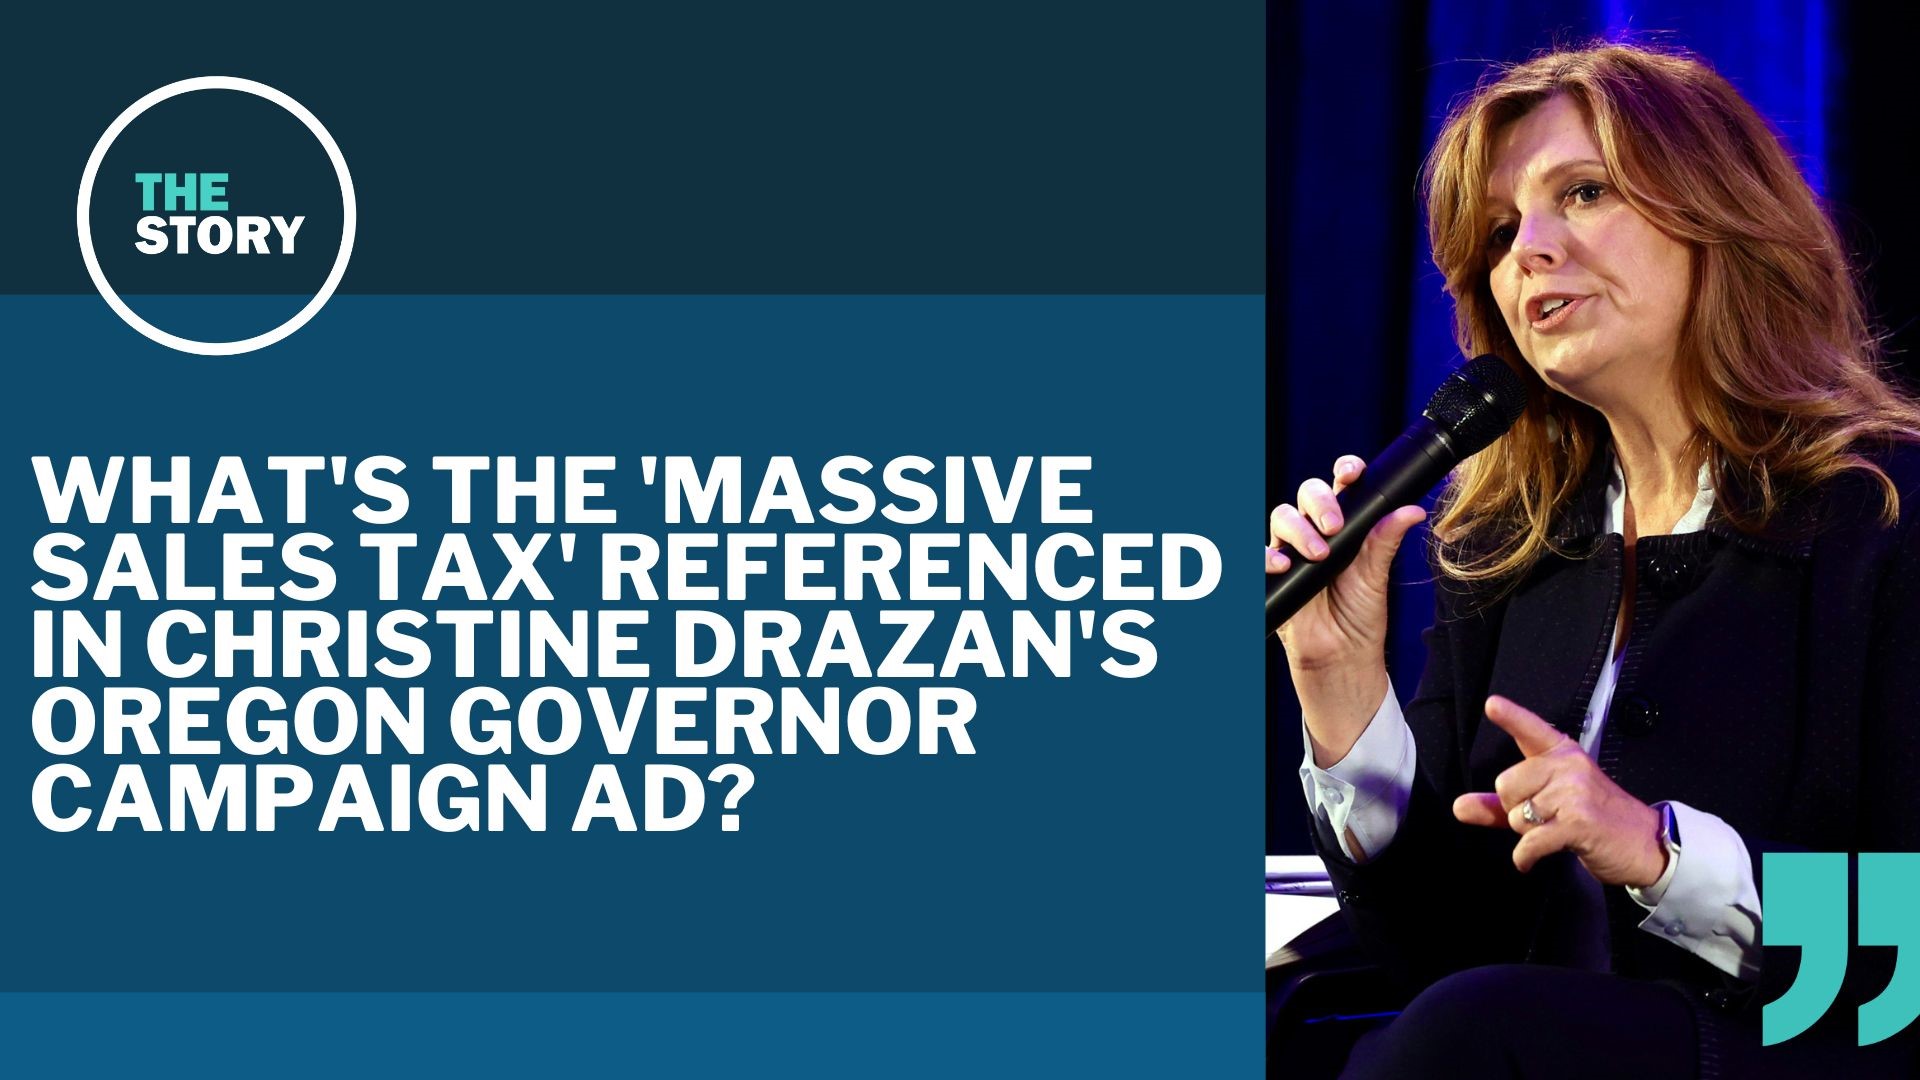 The Republican candidate for Oregon governor put out an ad that says her opponents helped Gov. Kate Brown pass a massive, hidden sales tax.